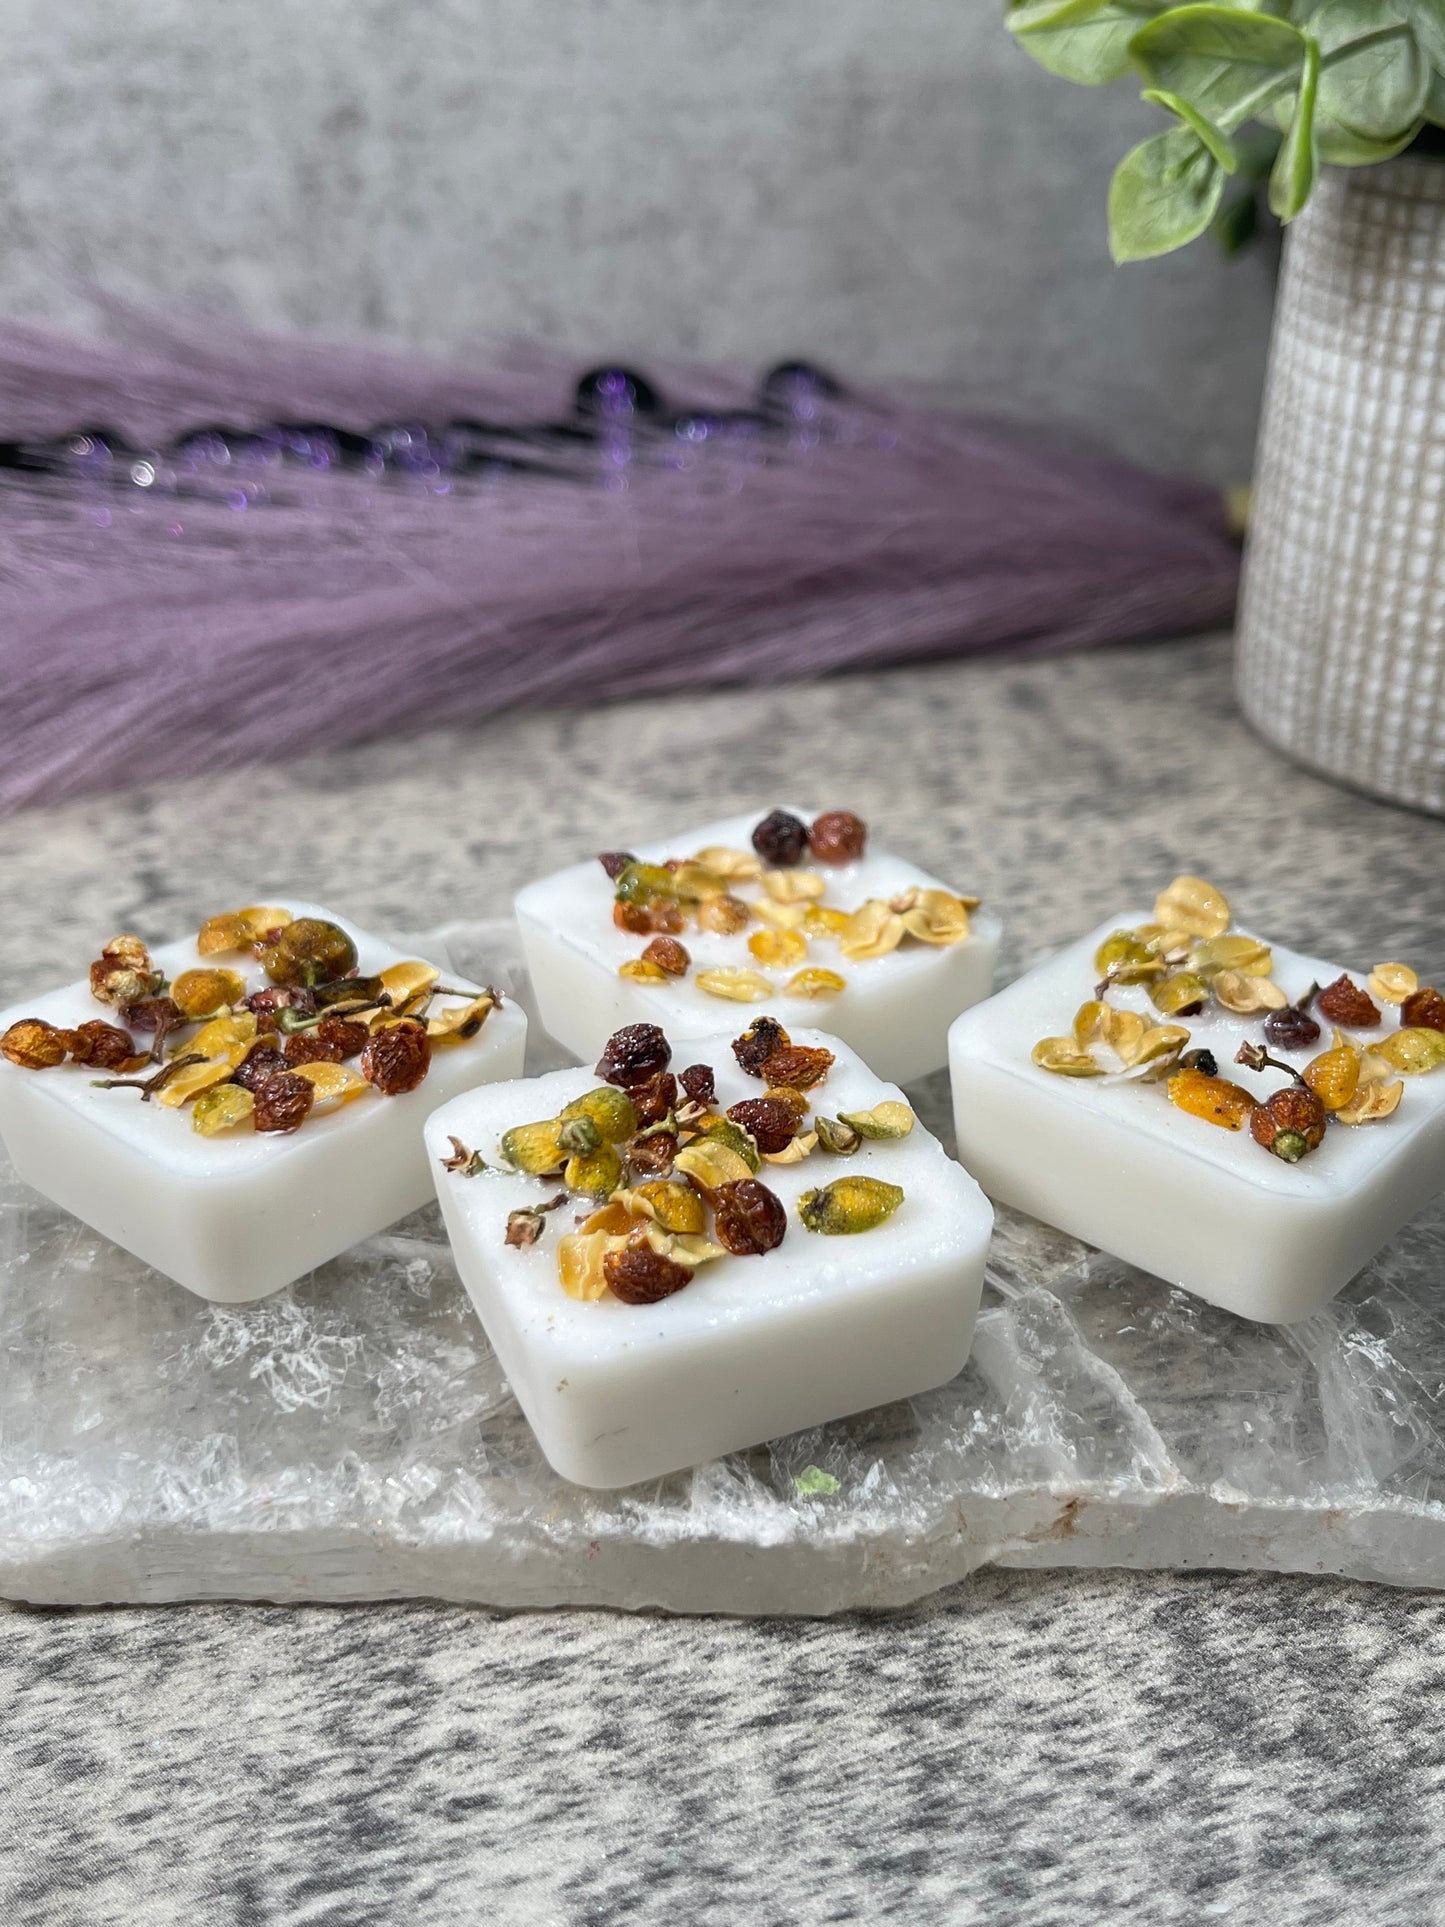 Square Wax Melts-Herbs/Dried Flowers